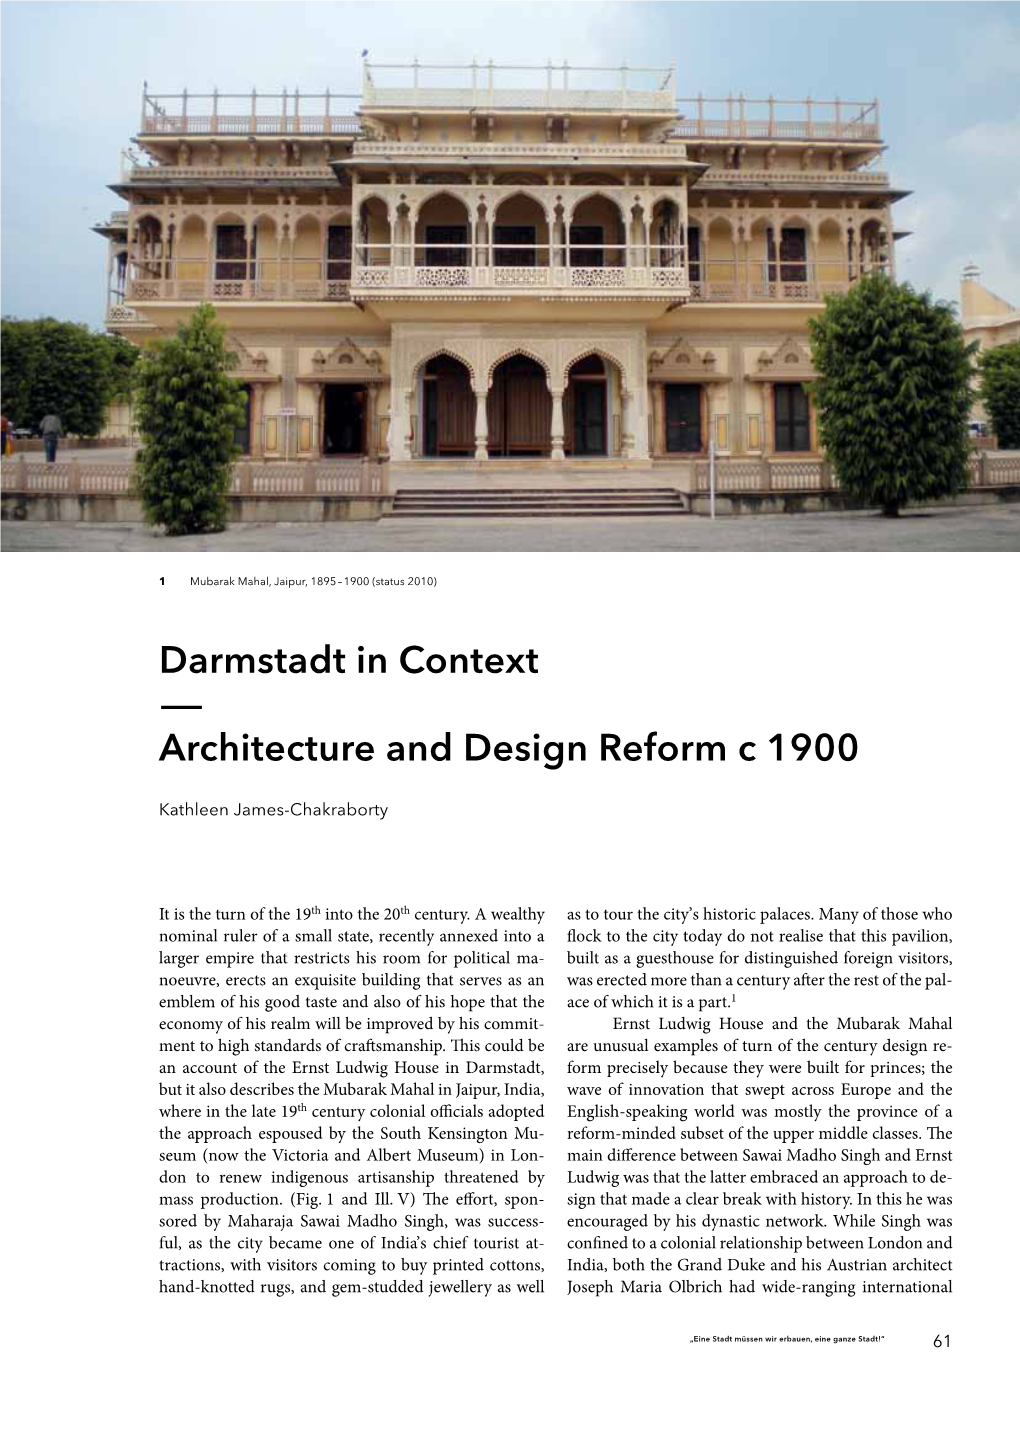 Darmstadt in Context — Architecture and Design Reform C 1900